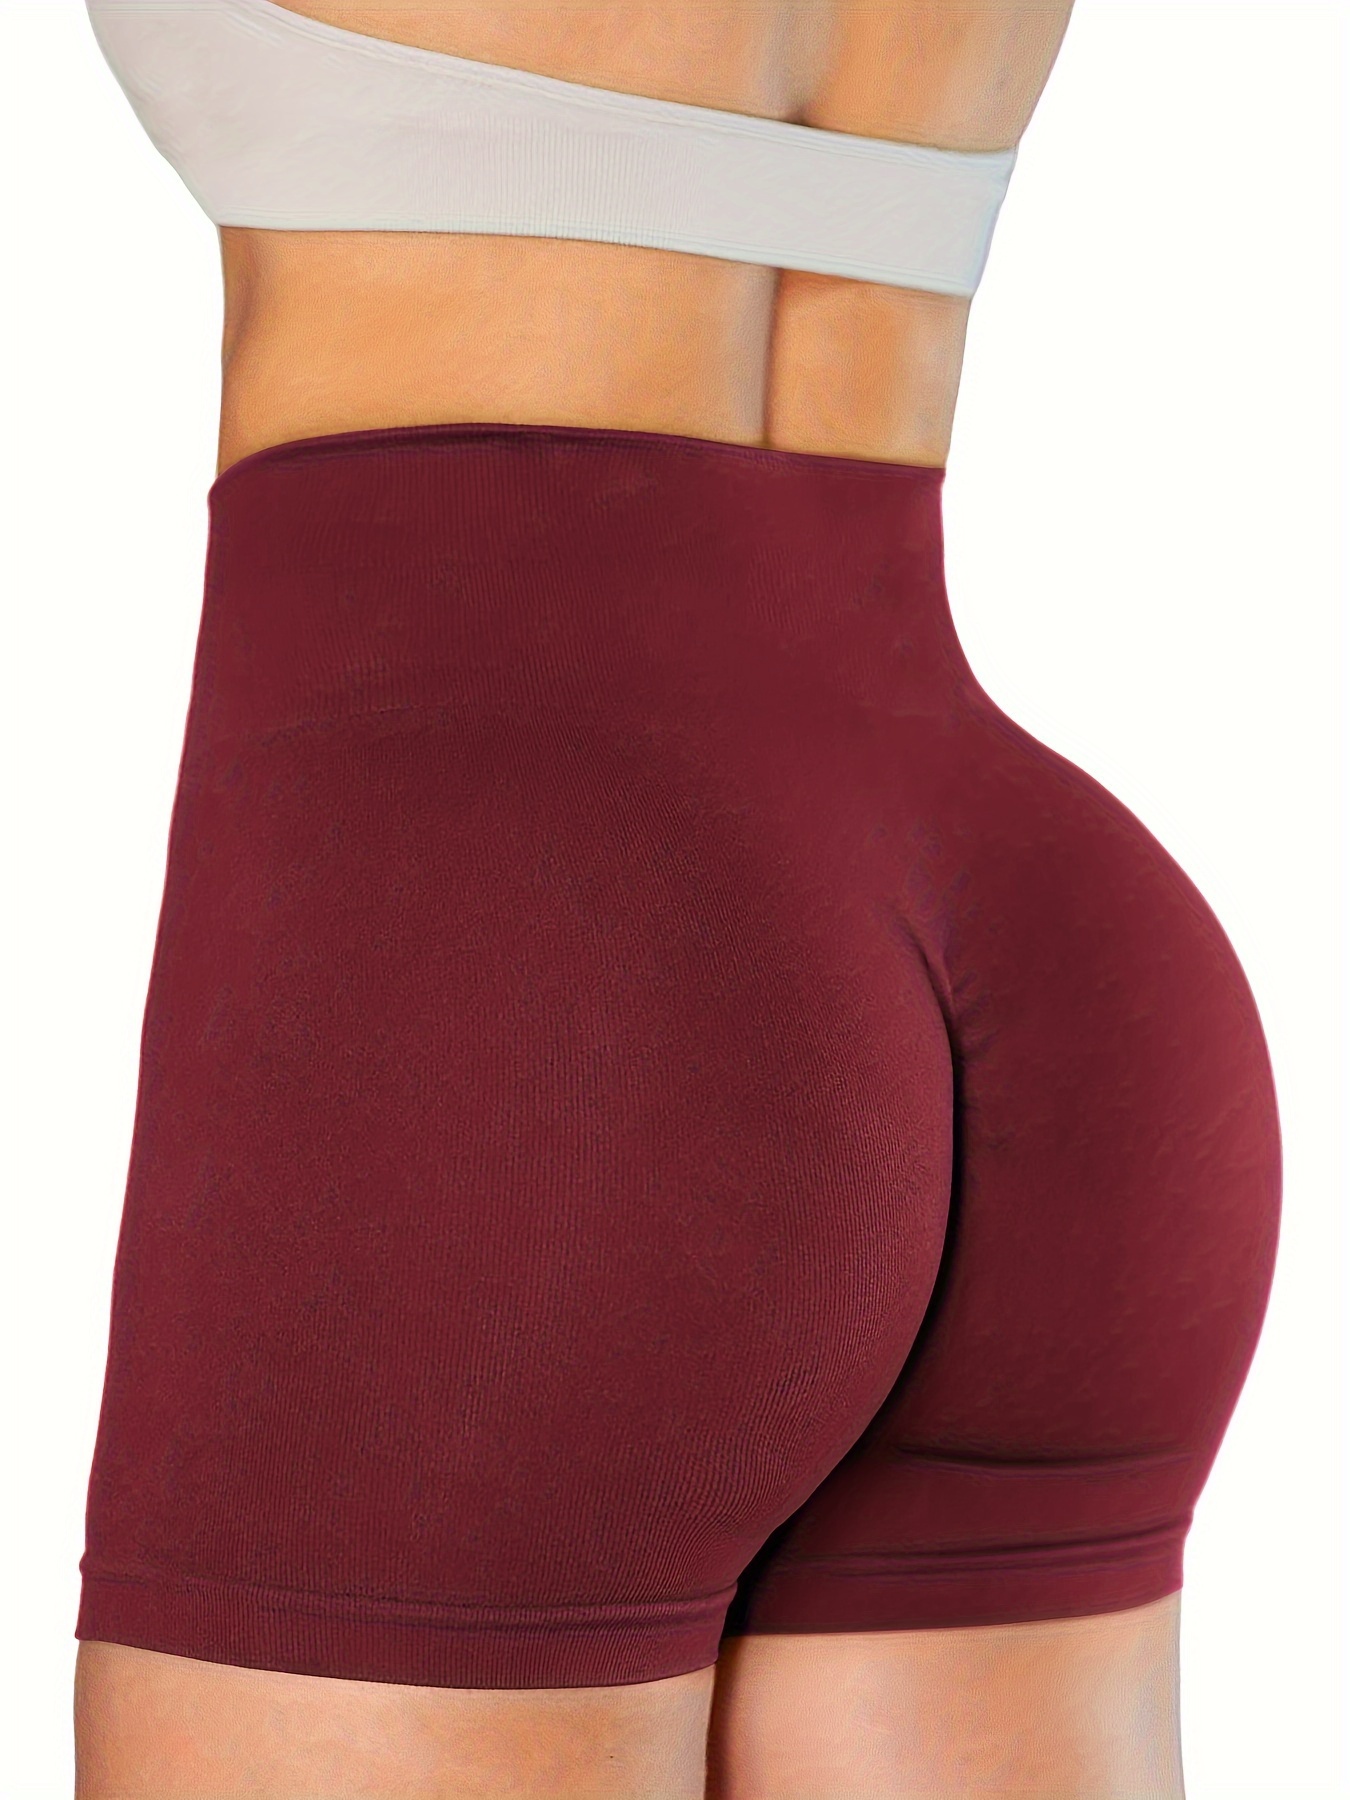 solid color quick drying yoga workout shorts high stretch sports running shorts womens activewear details 21